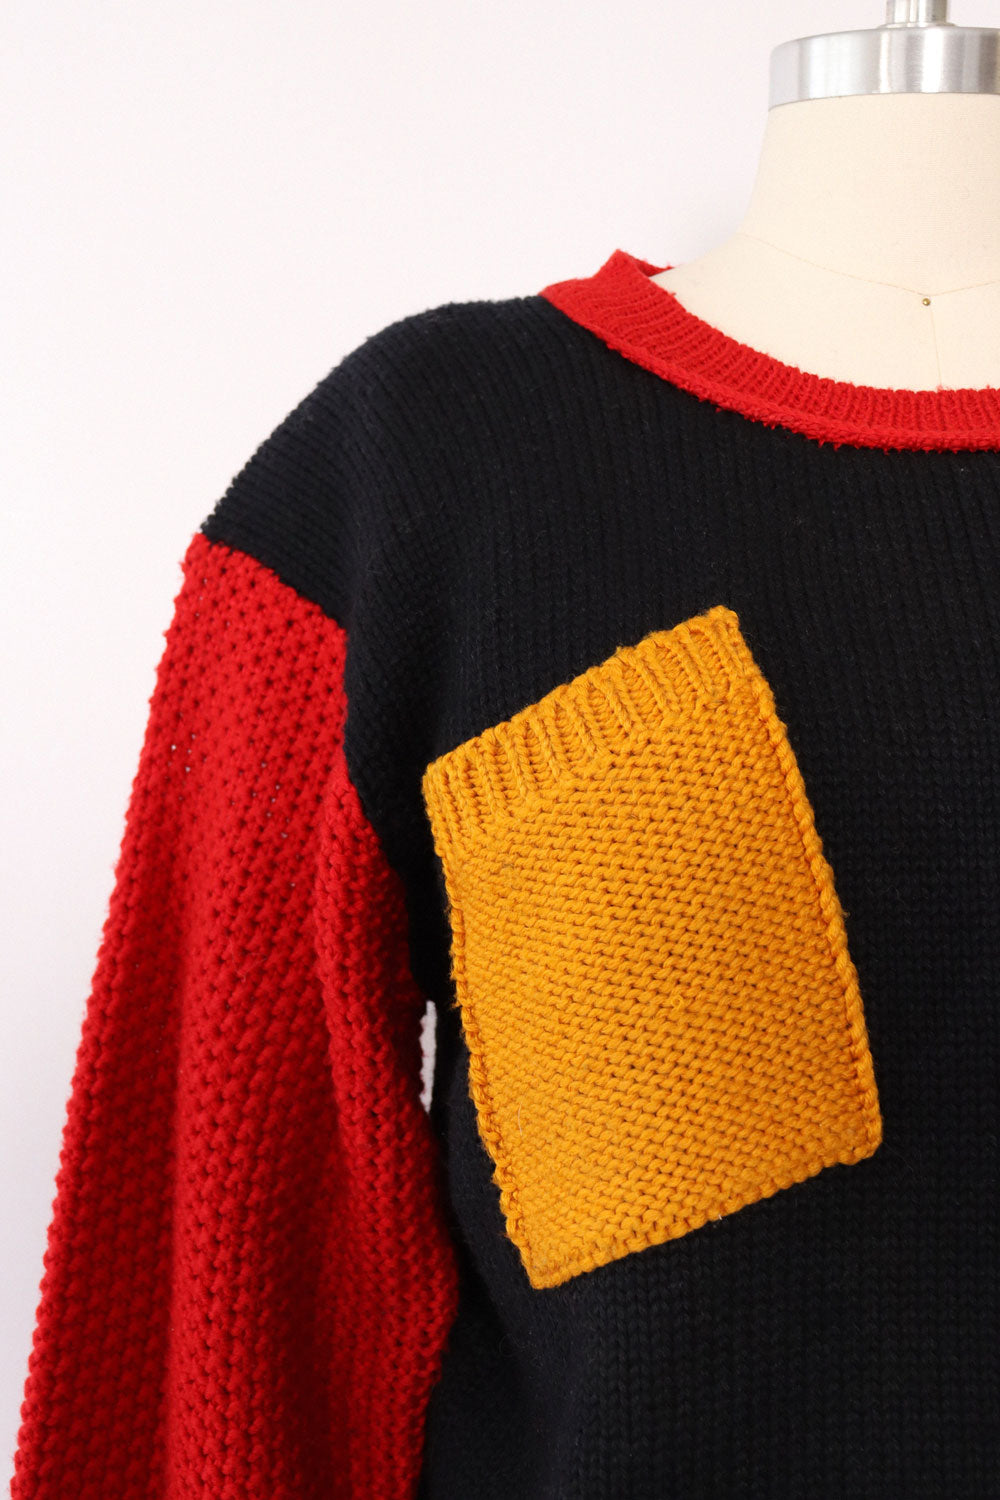 Primary Pocket Cropped Sweater S-L